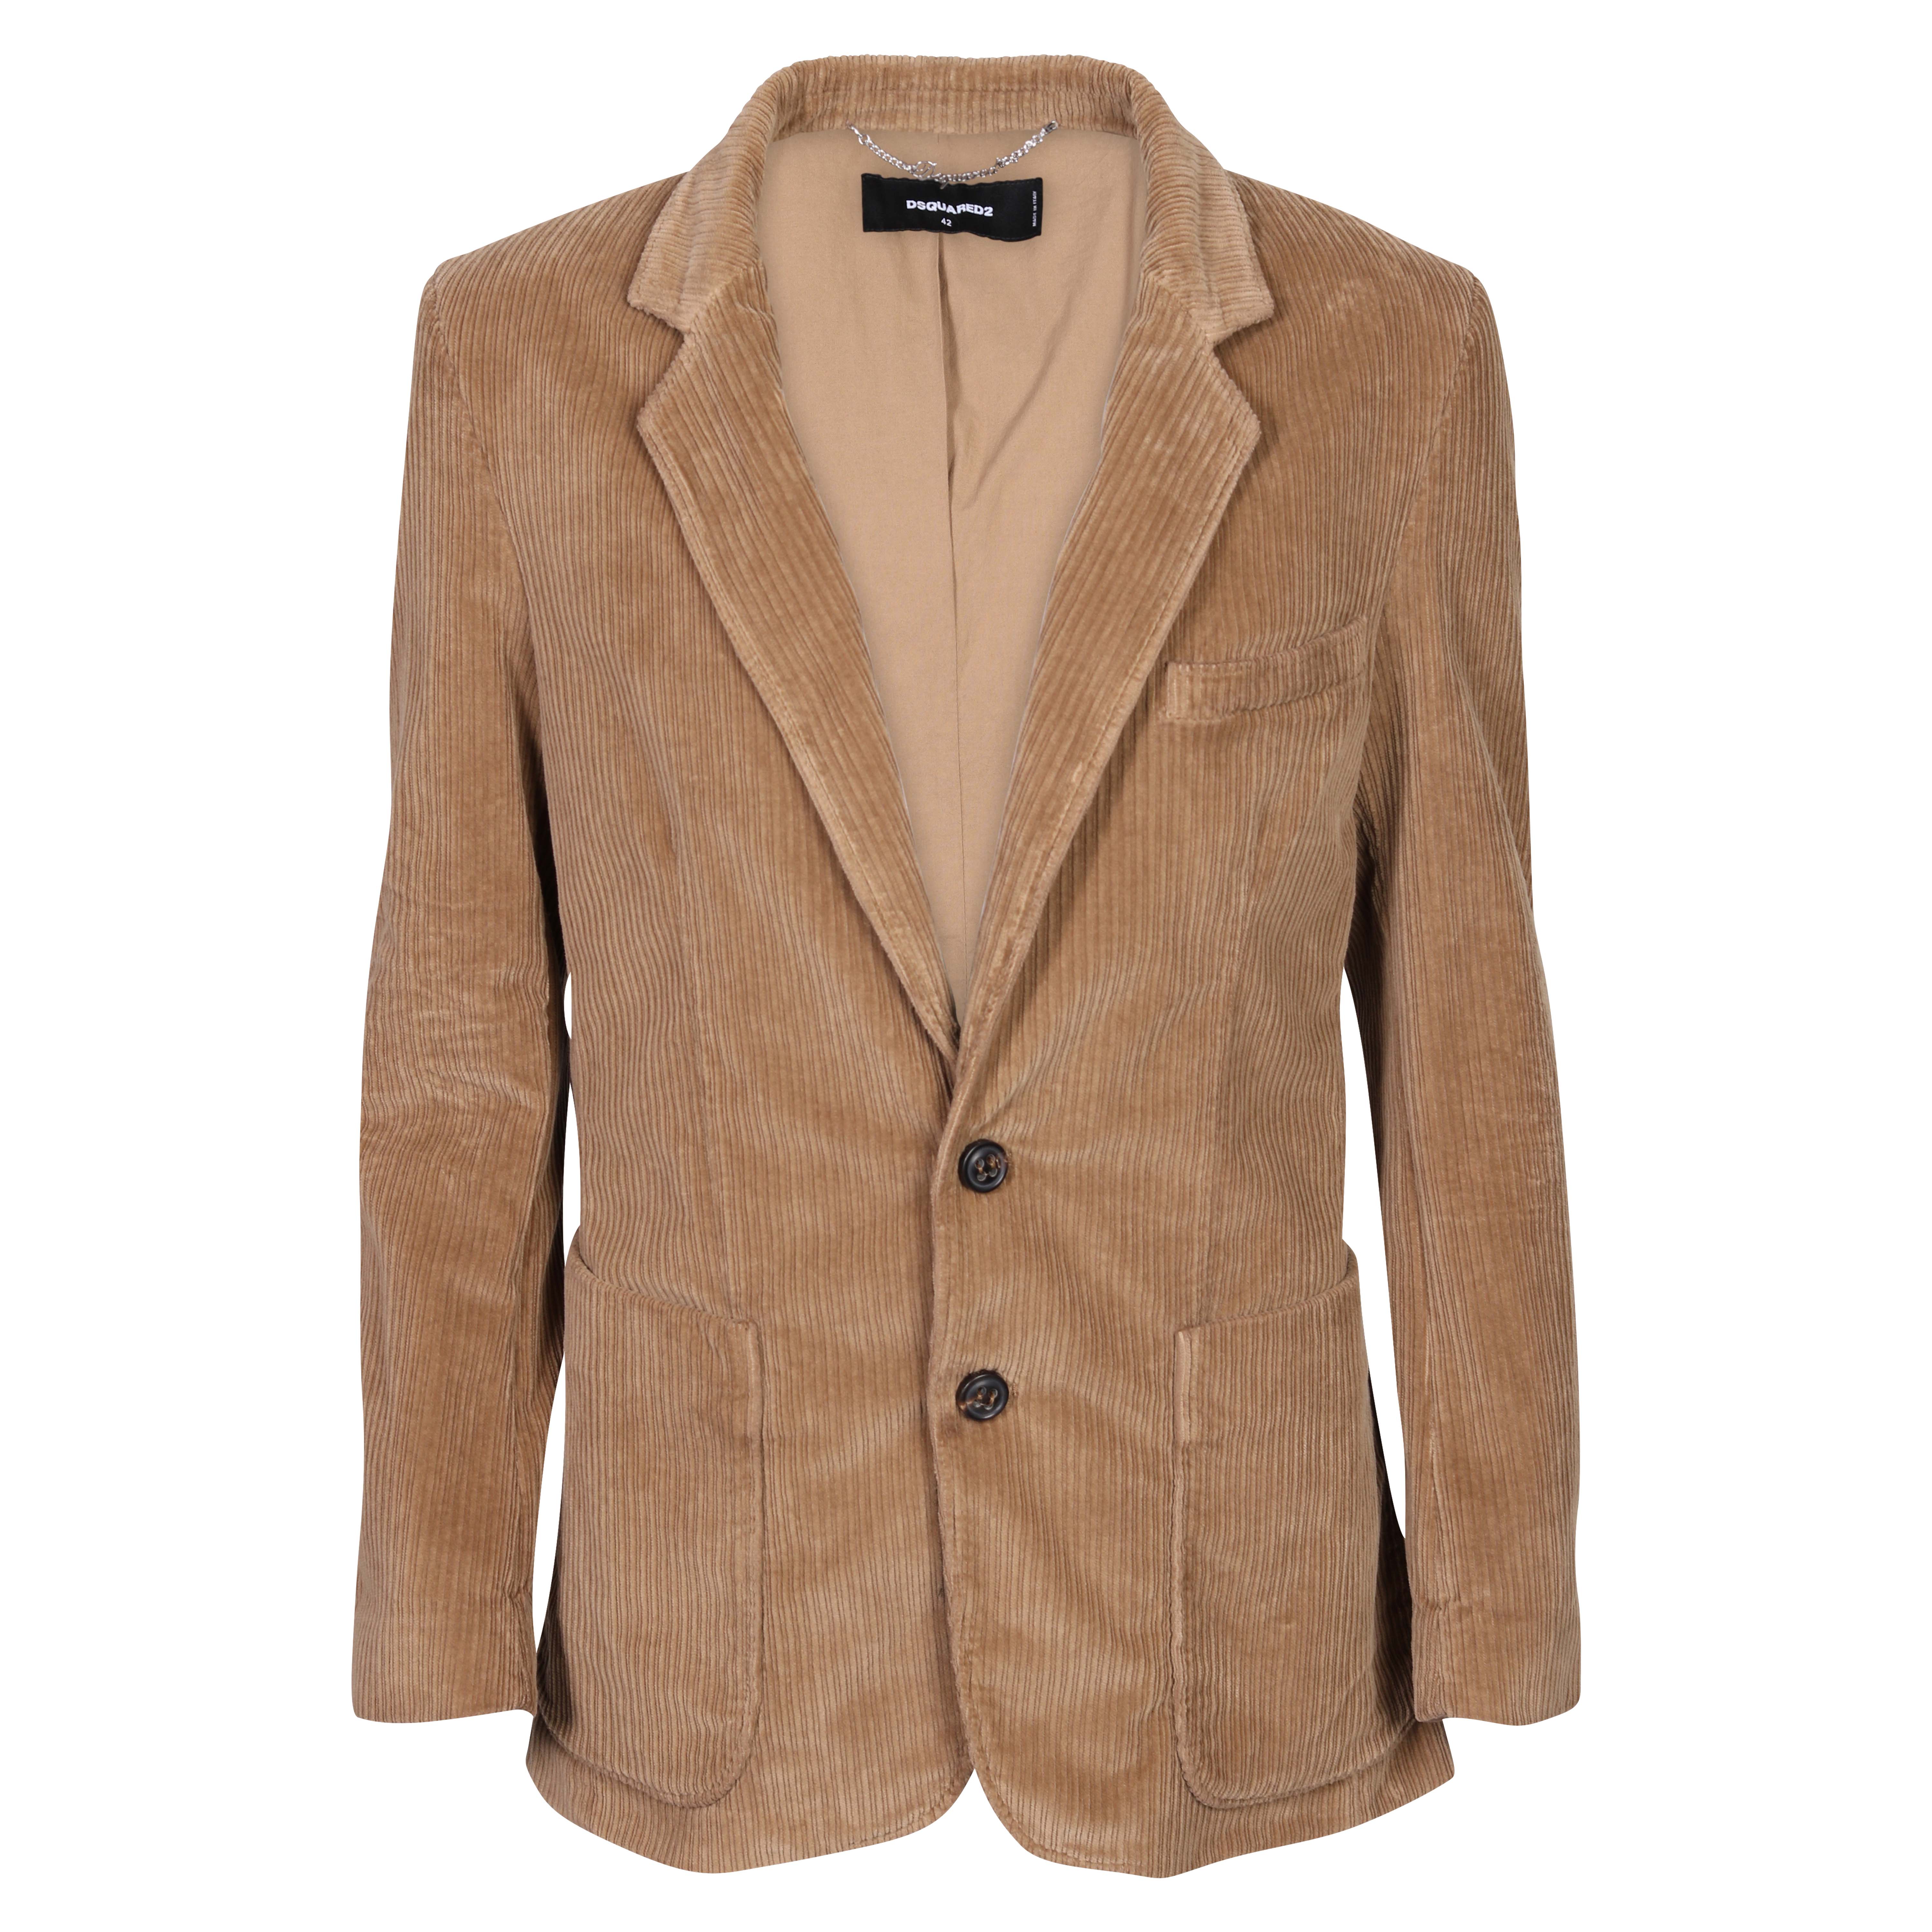 DSQUARED2 East 2 Button Corduroy Oversize Blazer in Camel